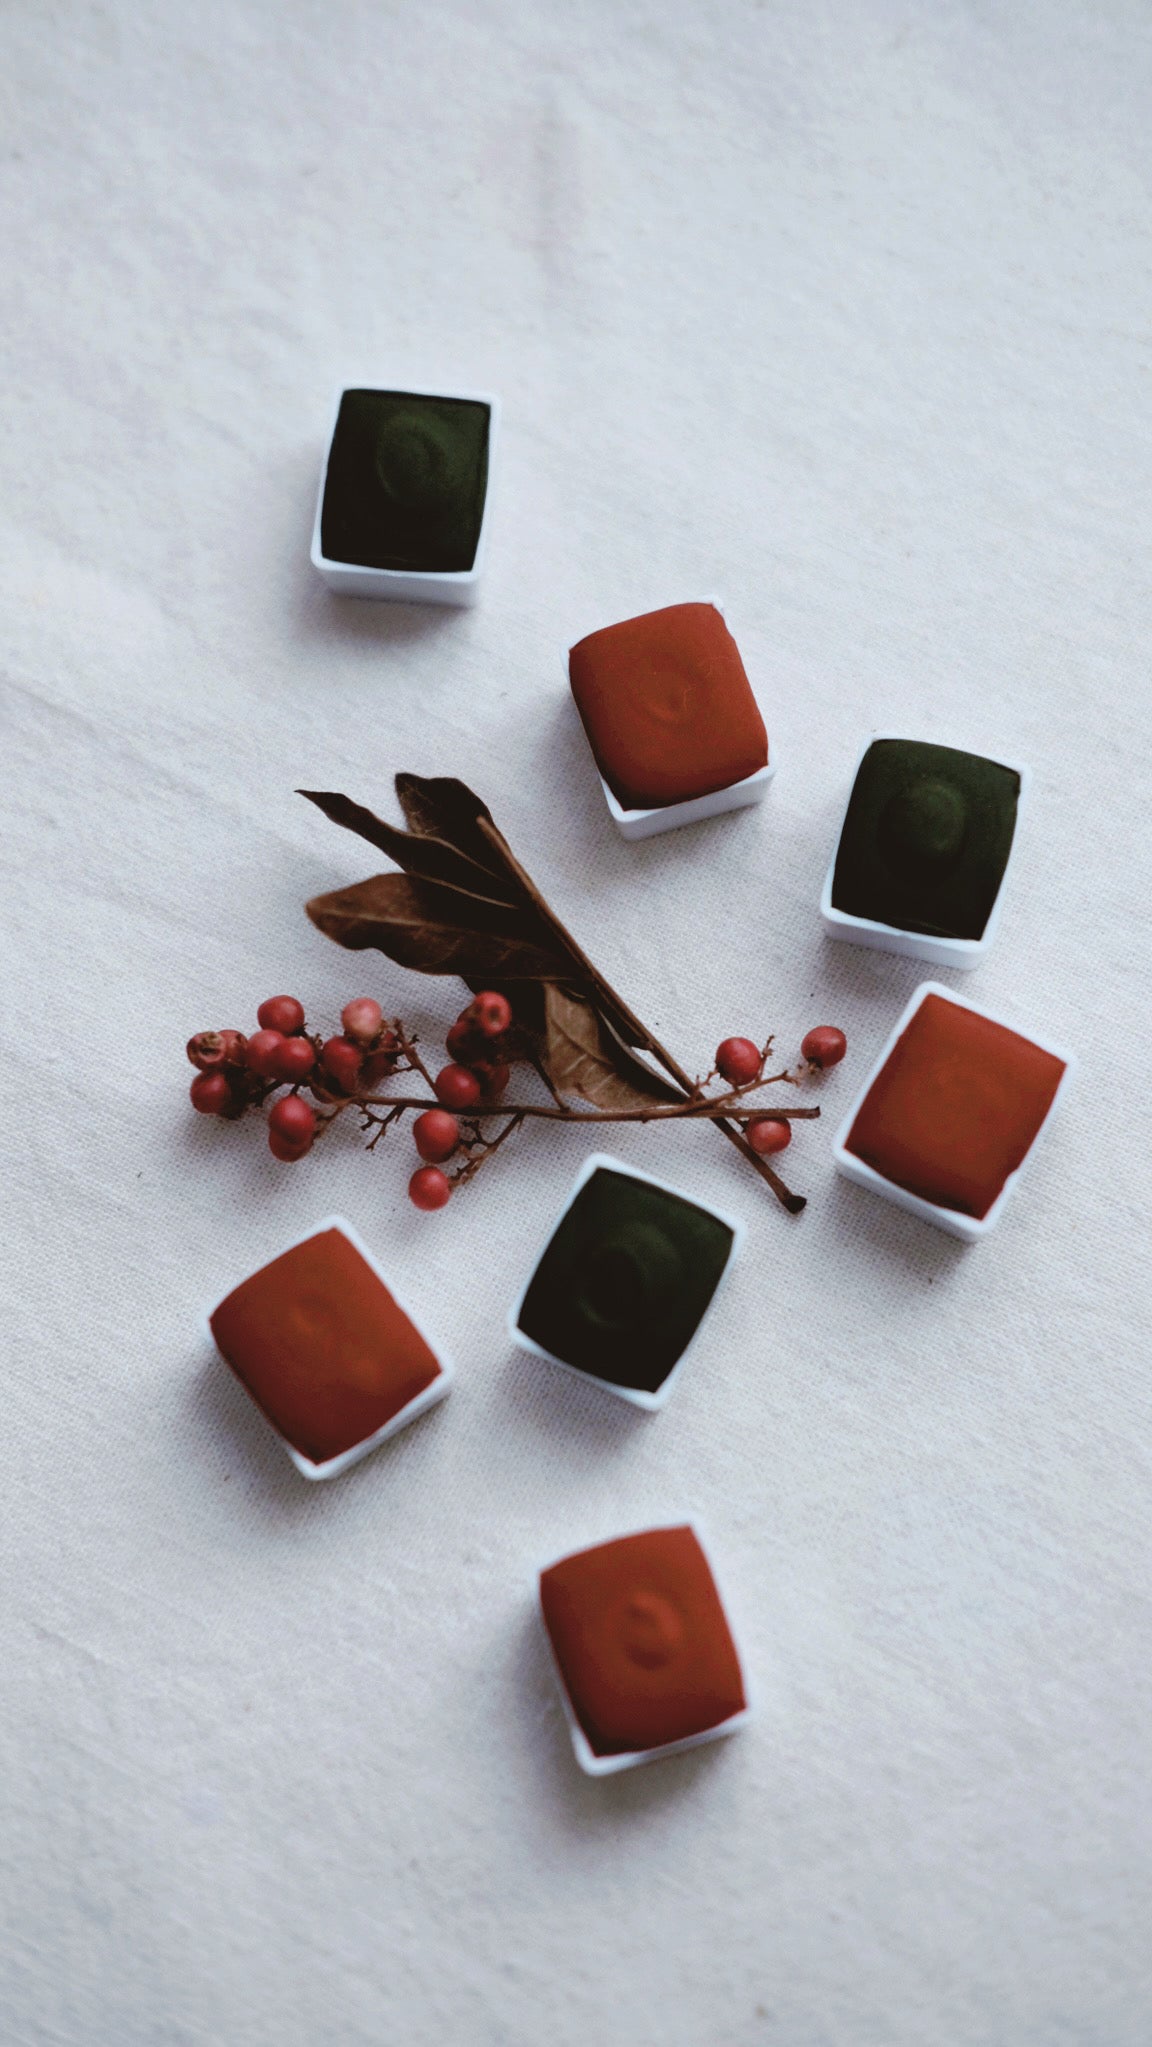 Winterberry  + Limited edition gemstone watercolor